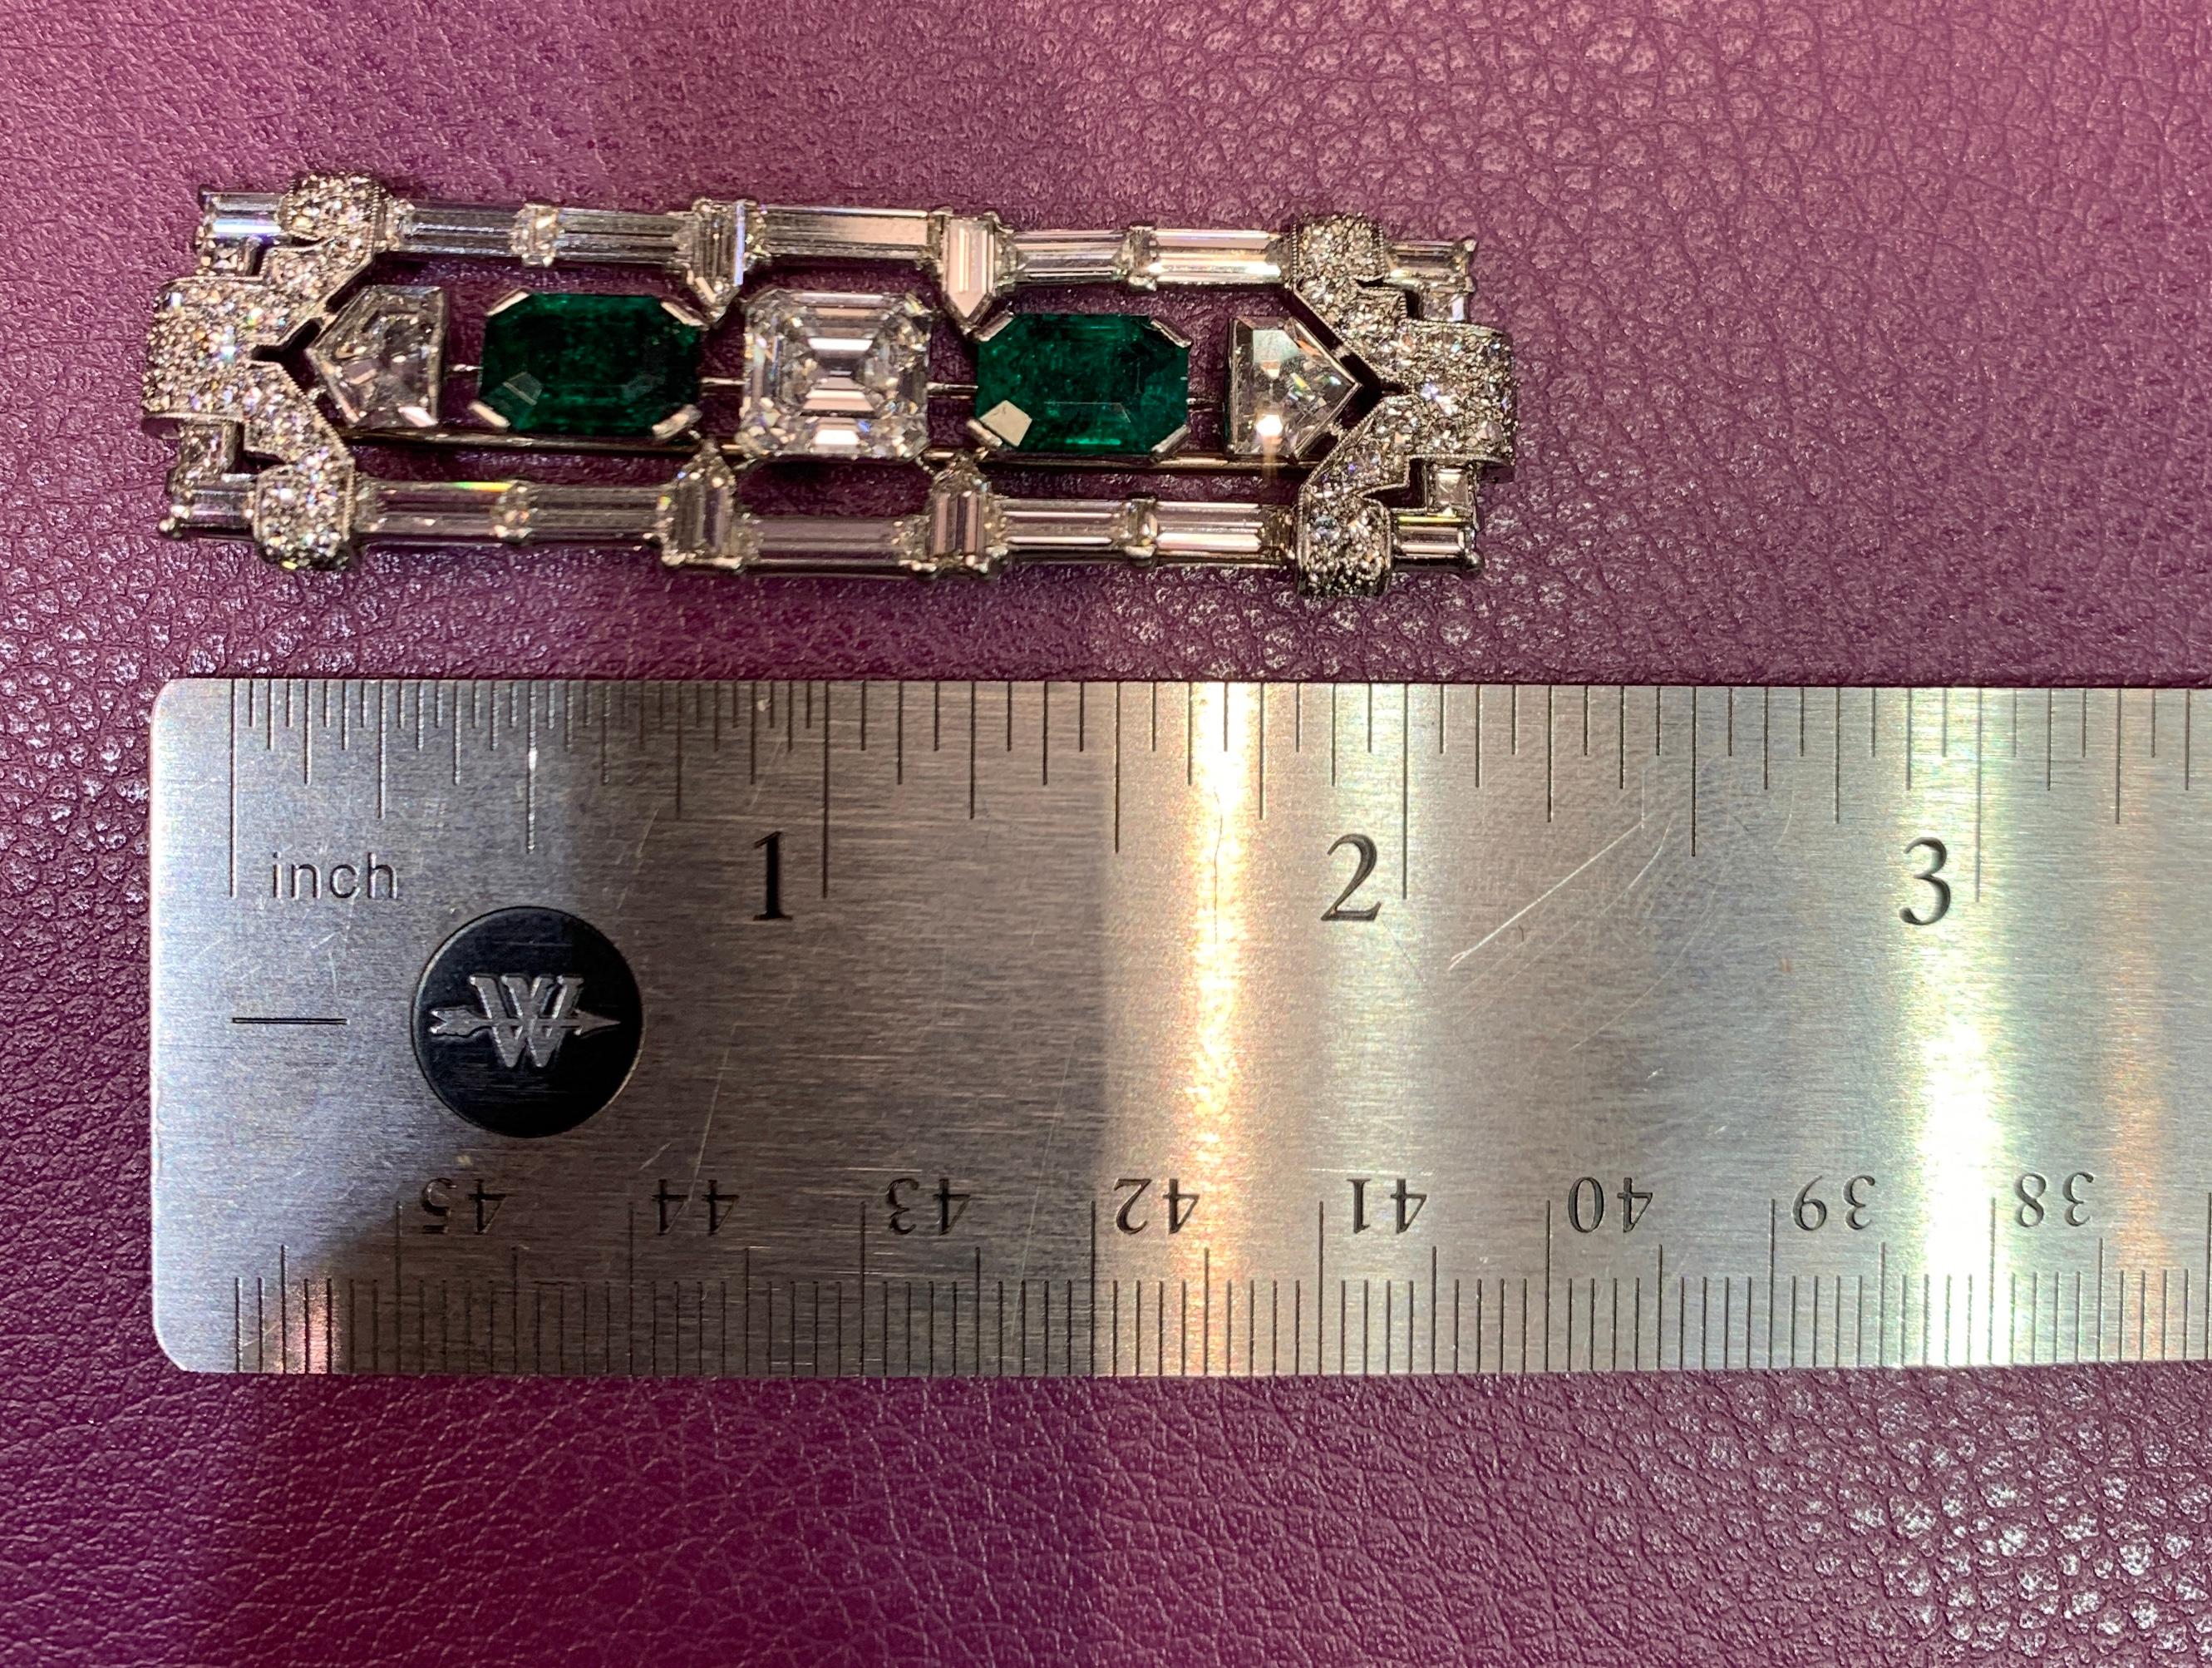 Gia Certified Art Deco Diamond and Emerald Brooch 
Has a GIA certified Square emerald cut diamond weighing 2.10 carats and 